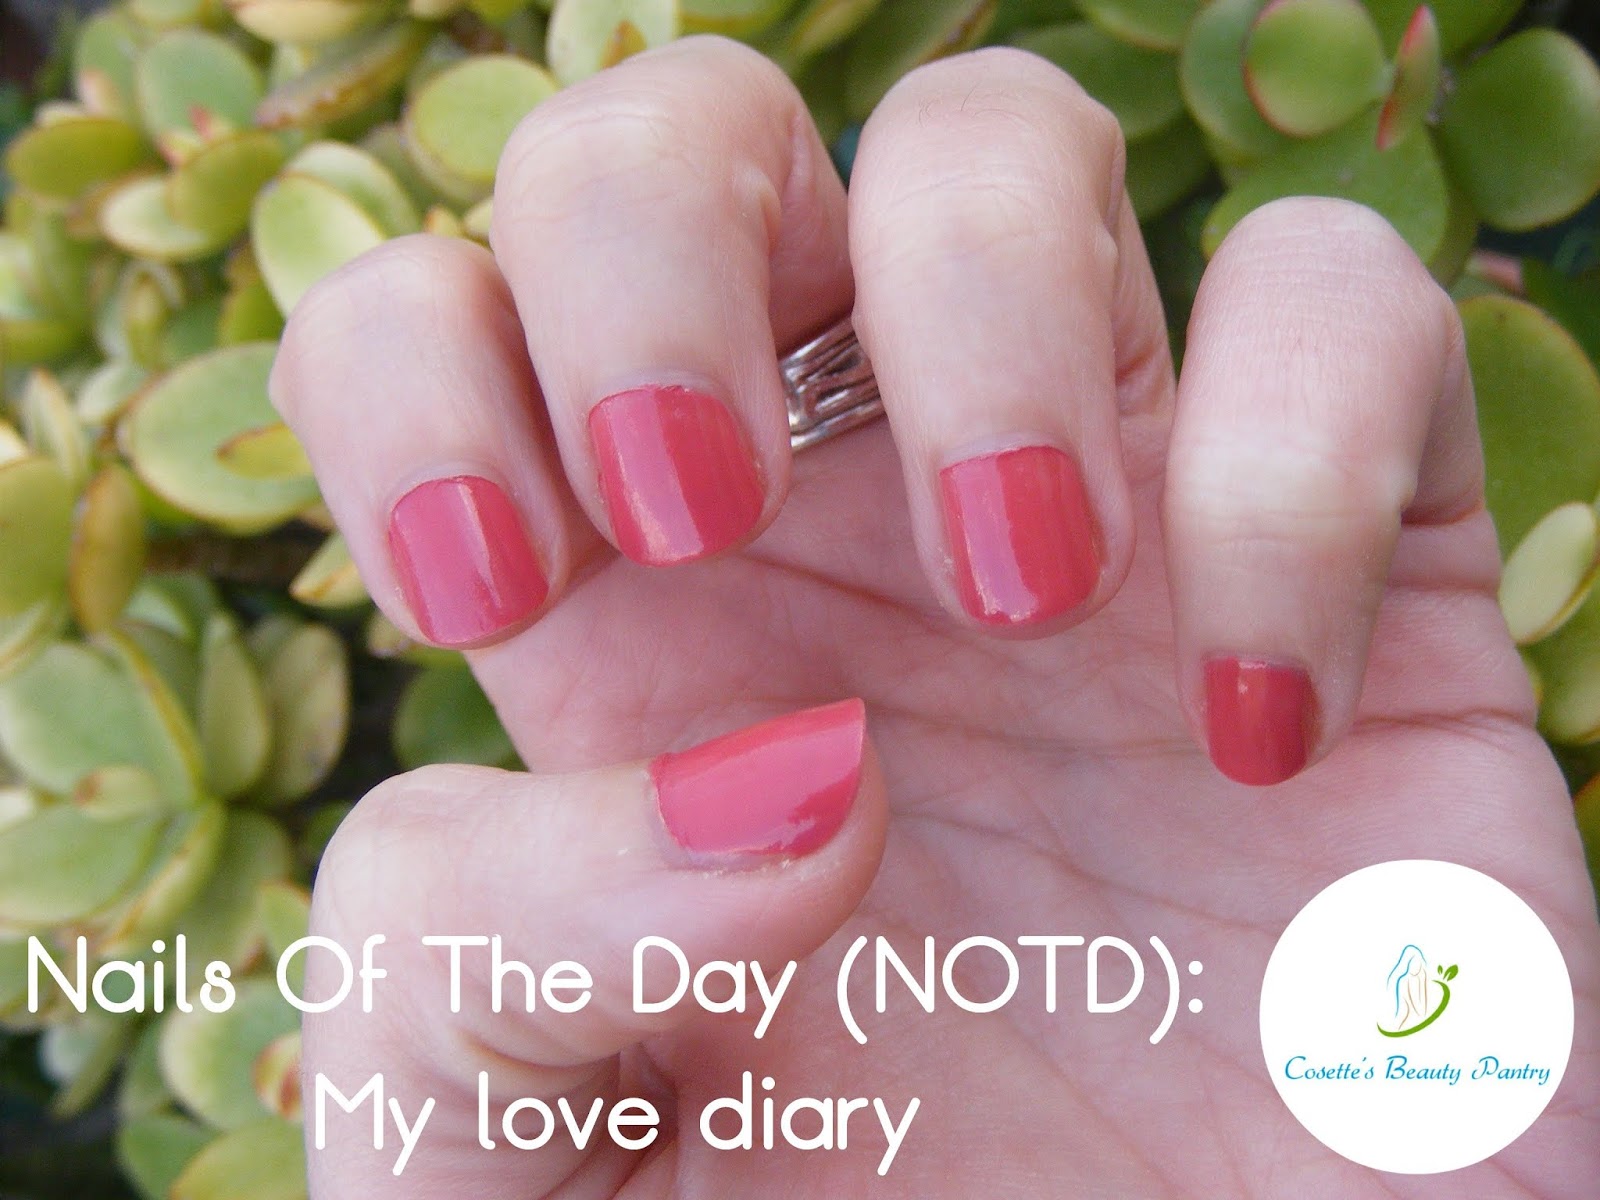 Nails Of The Day (NOTD): My love diary  💅